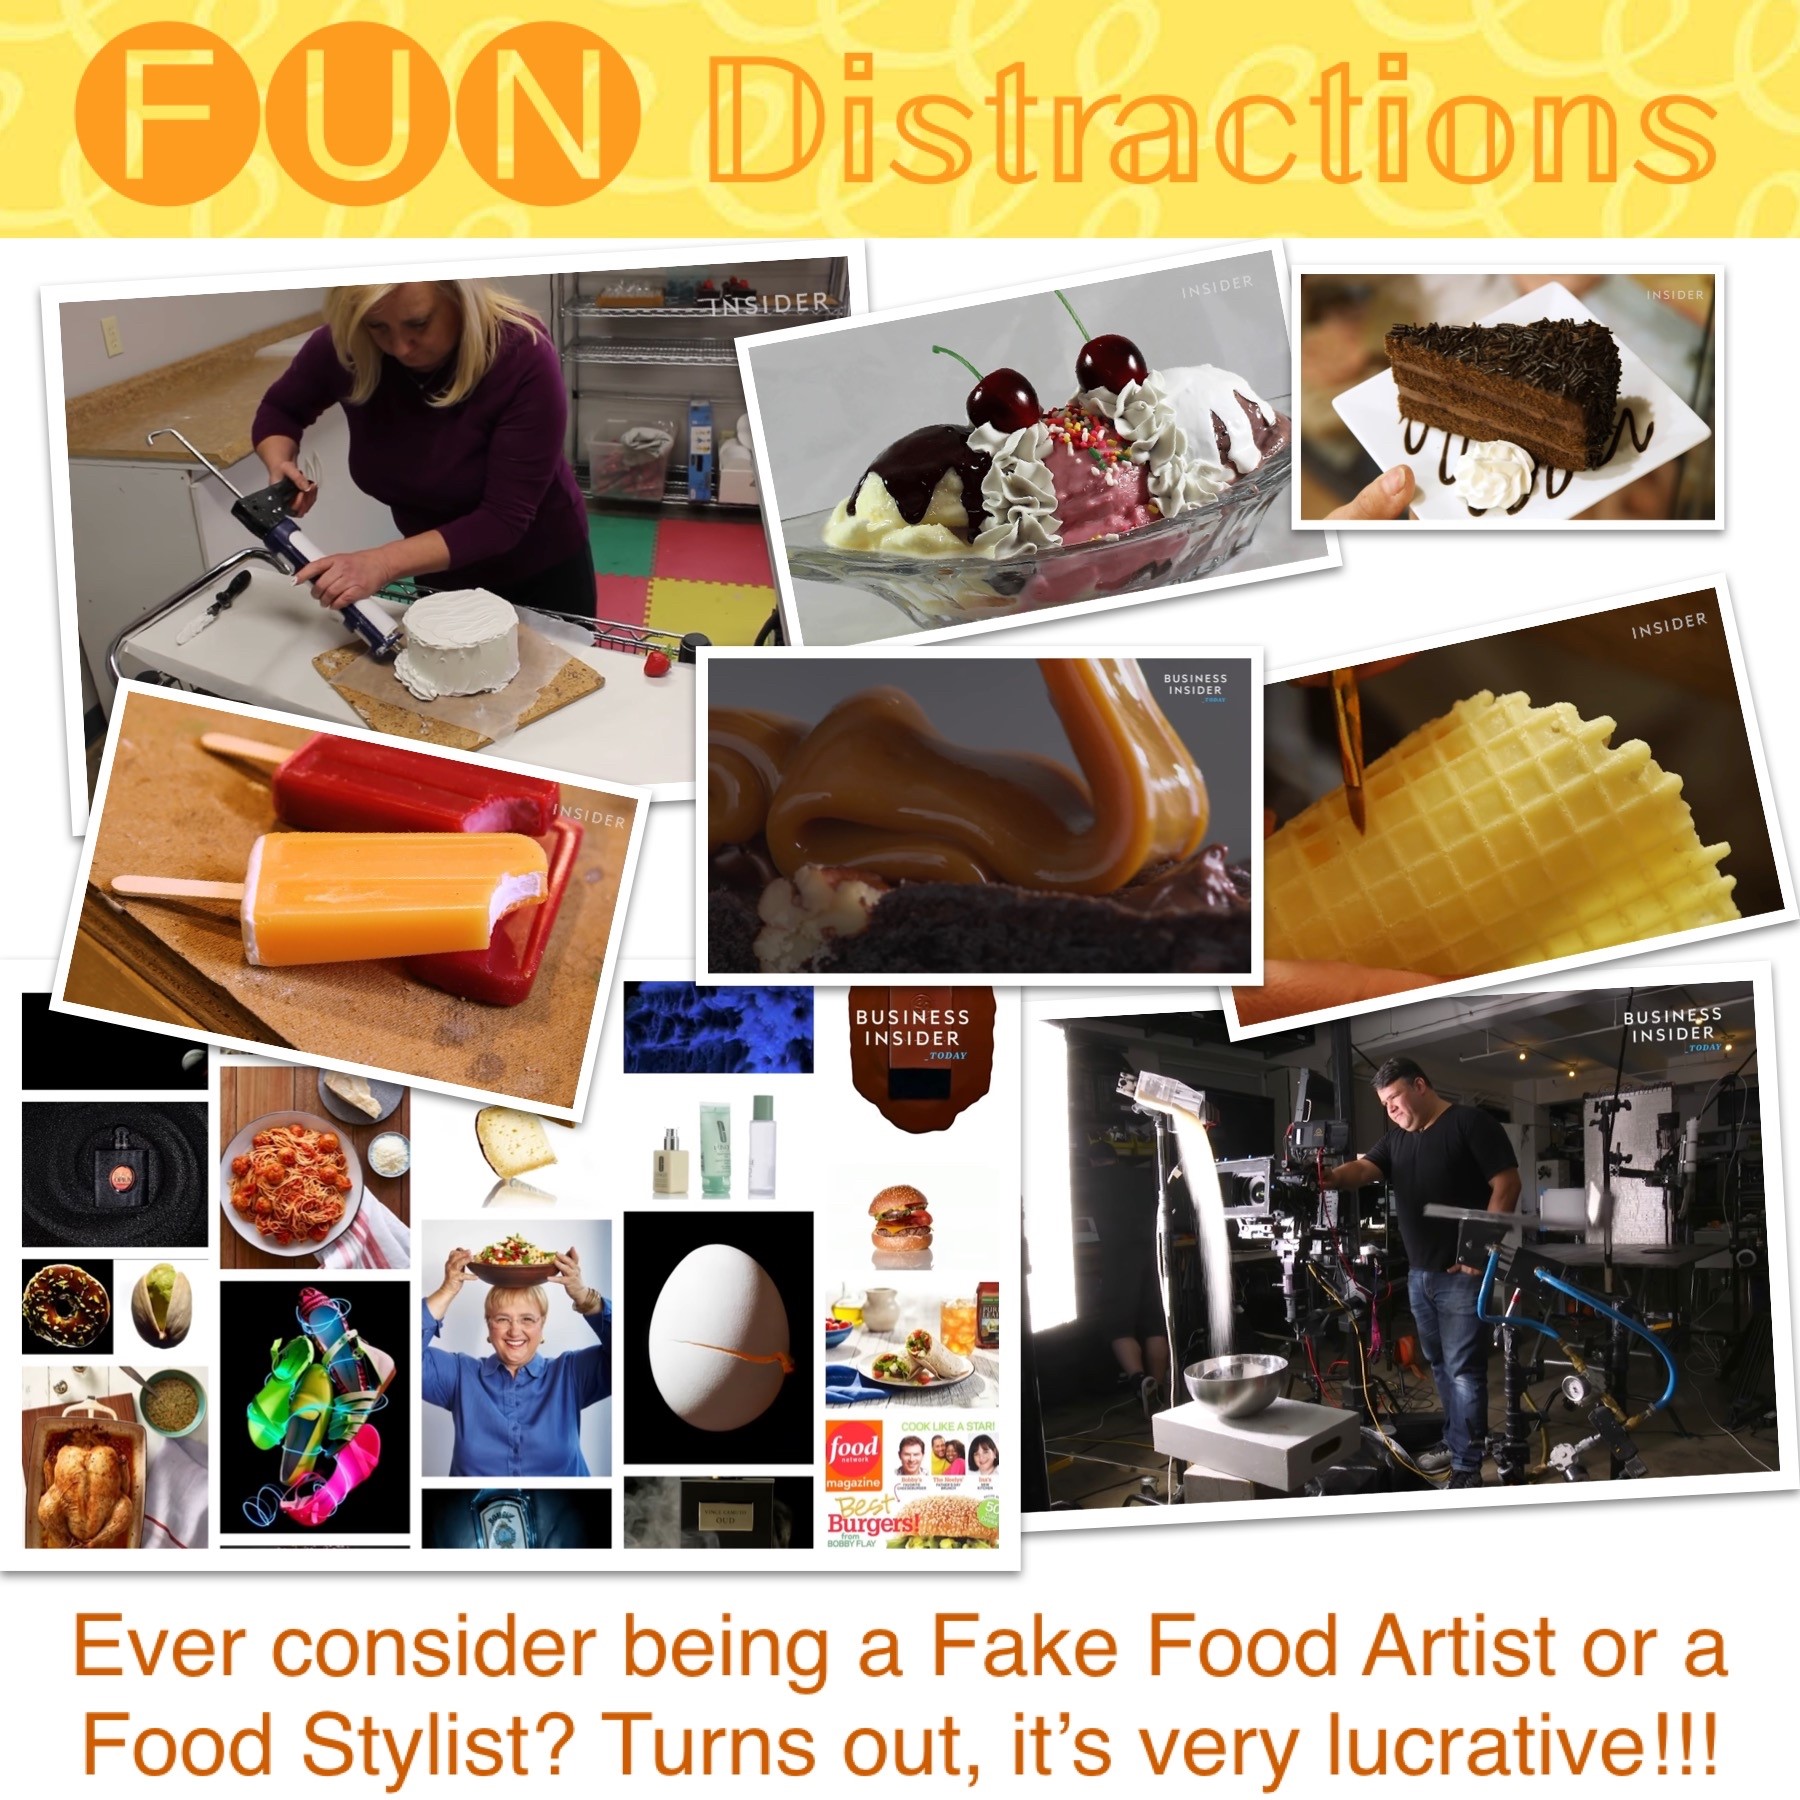 Image advertising the Library’s FUN Distractions series post on Fake Food Artists and Food Stylists